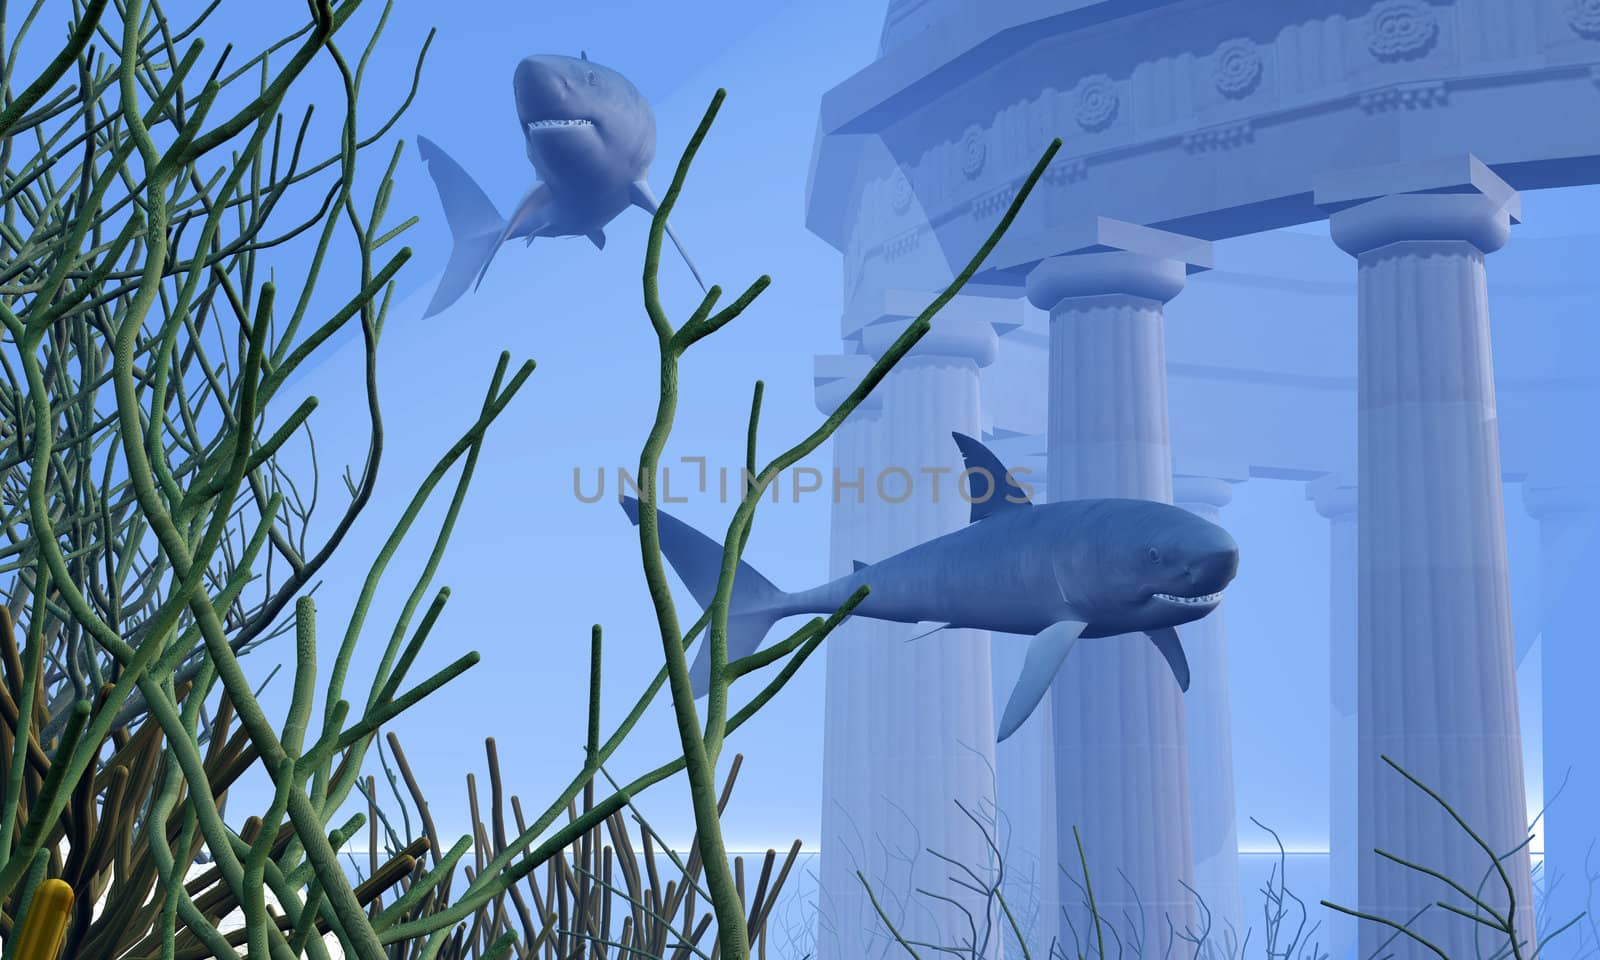 Two Mako sharks swim by a greek temple submerged in the ocean depths.